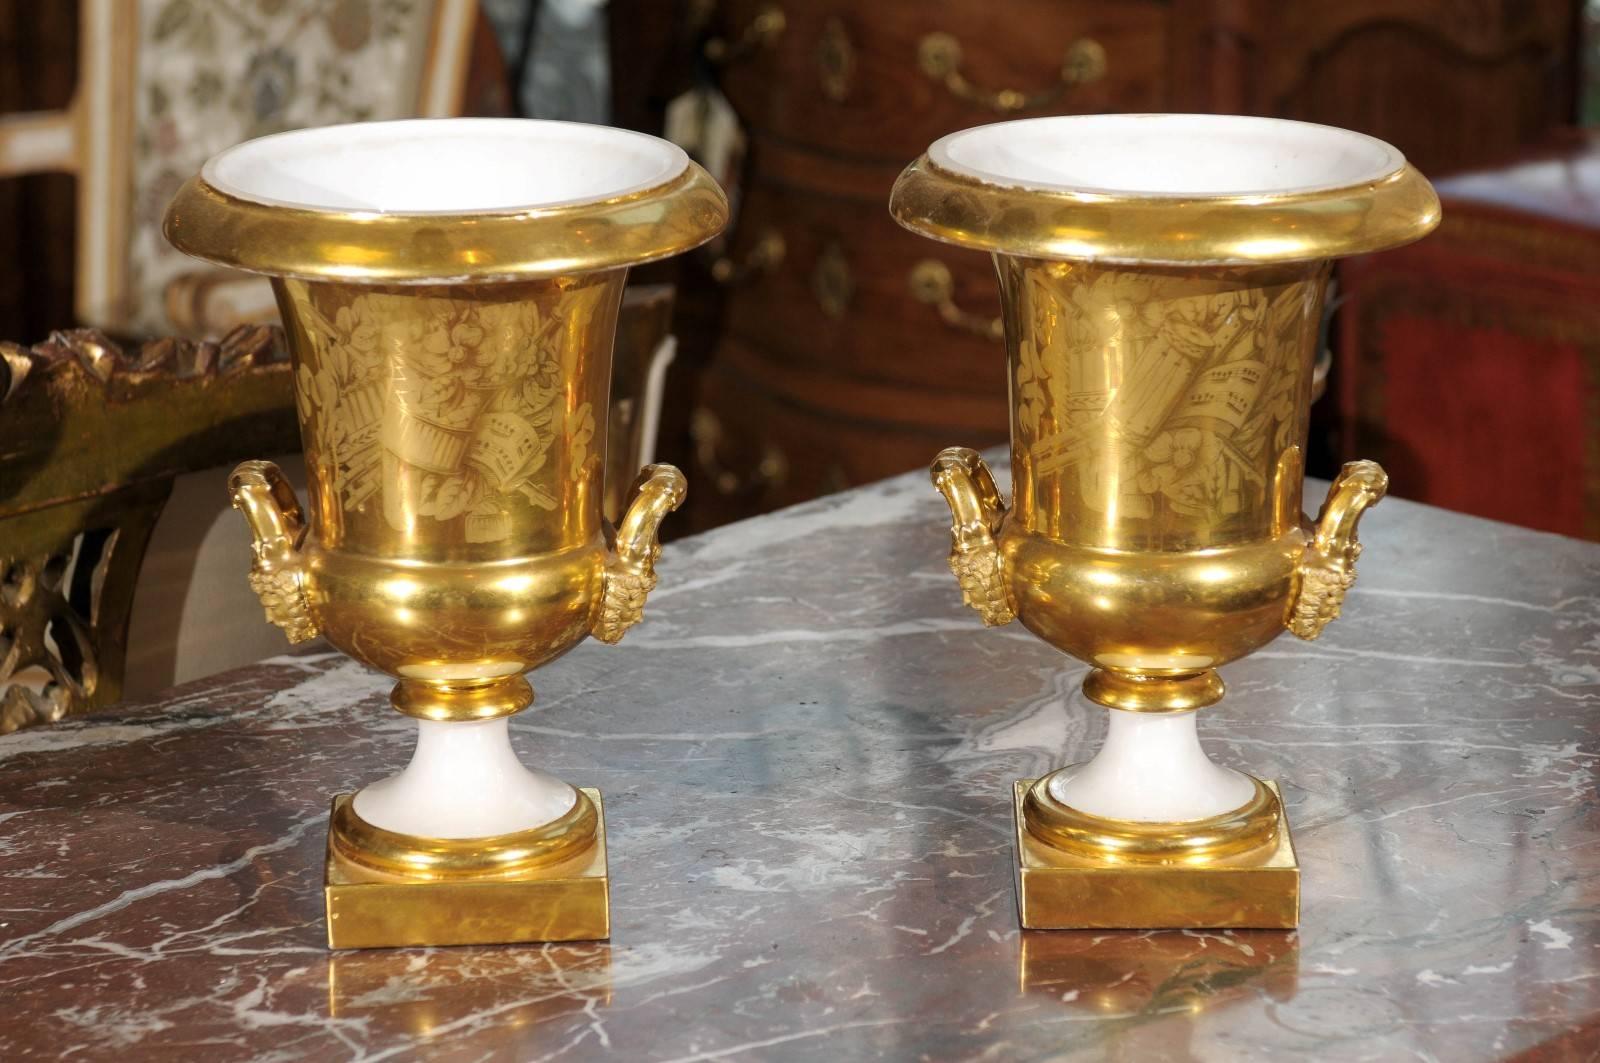 Pair of 19th Century French Paris Porcelain Urns with Painted Scenes & Handles For Sale 5